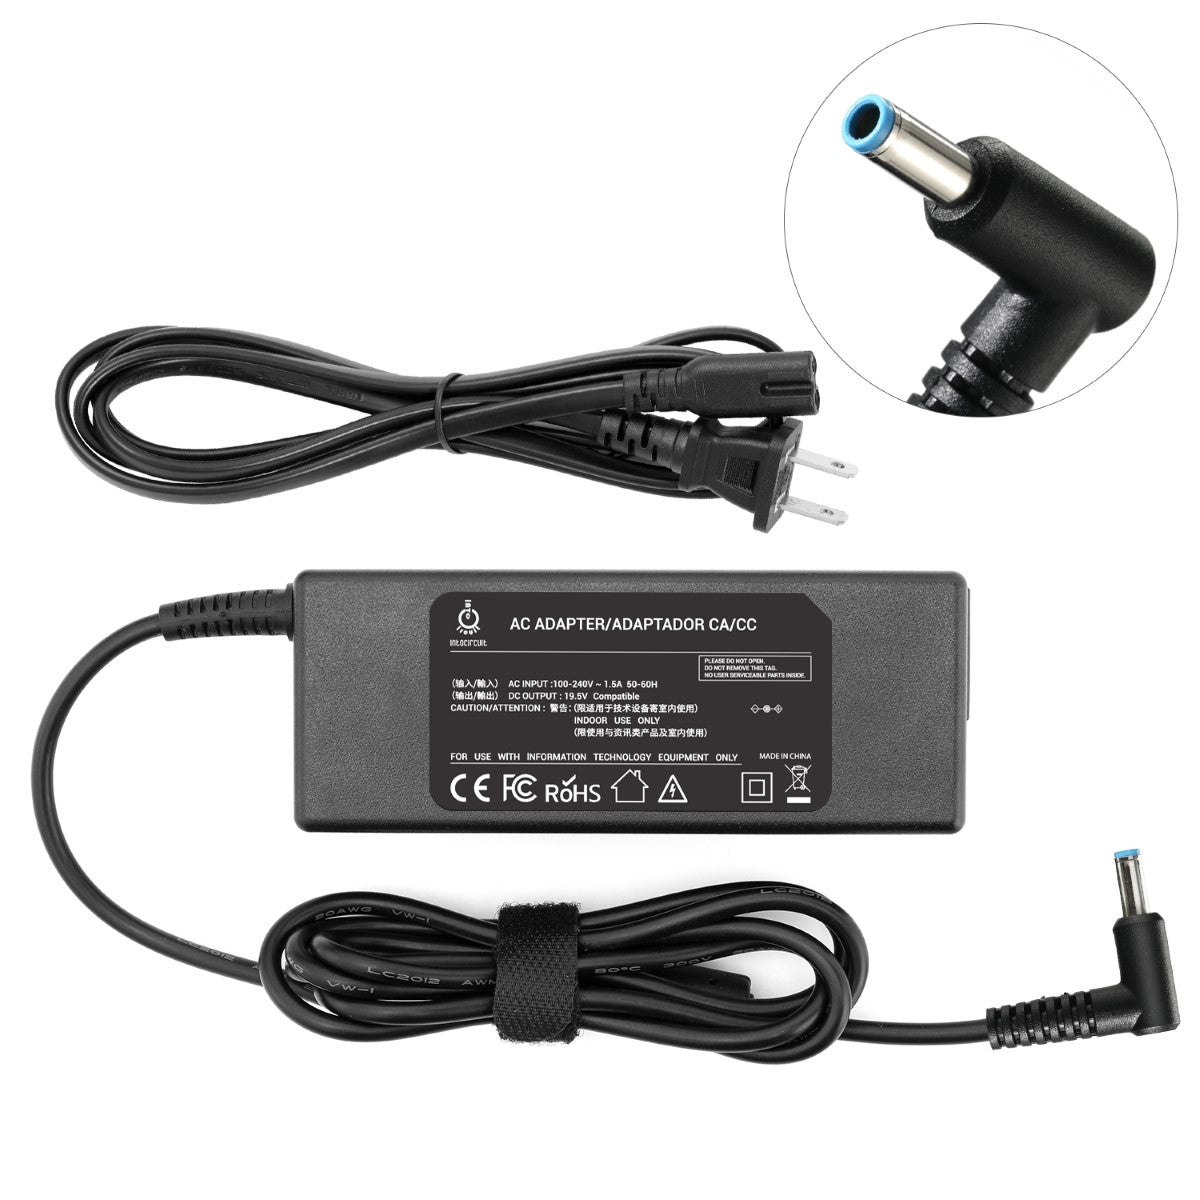 Charger for HP Stream 11-p050nr x360 Convertible Laptop